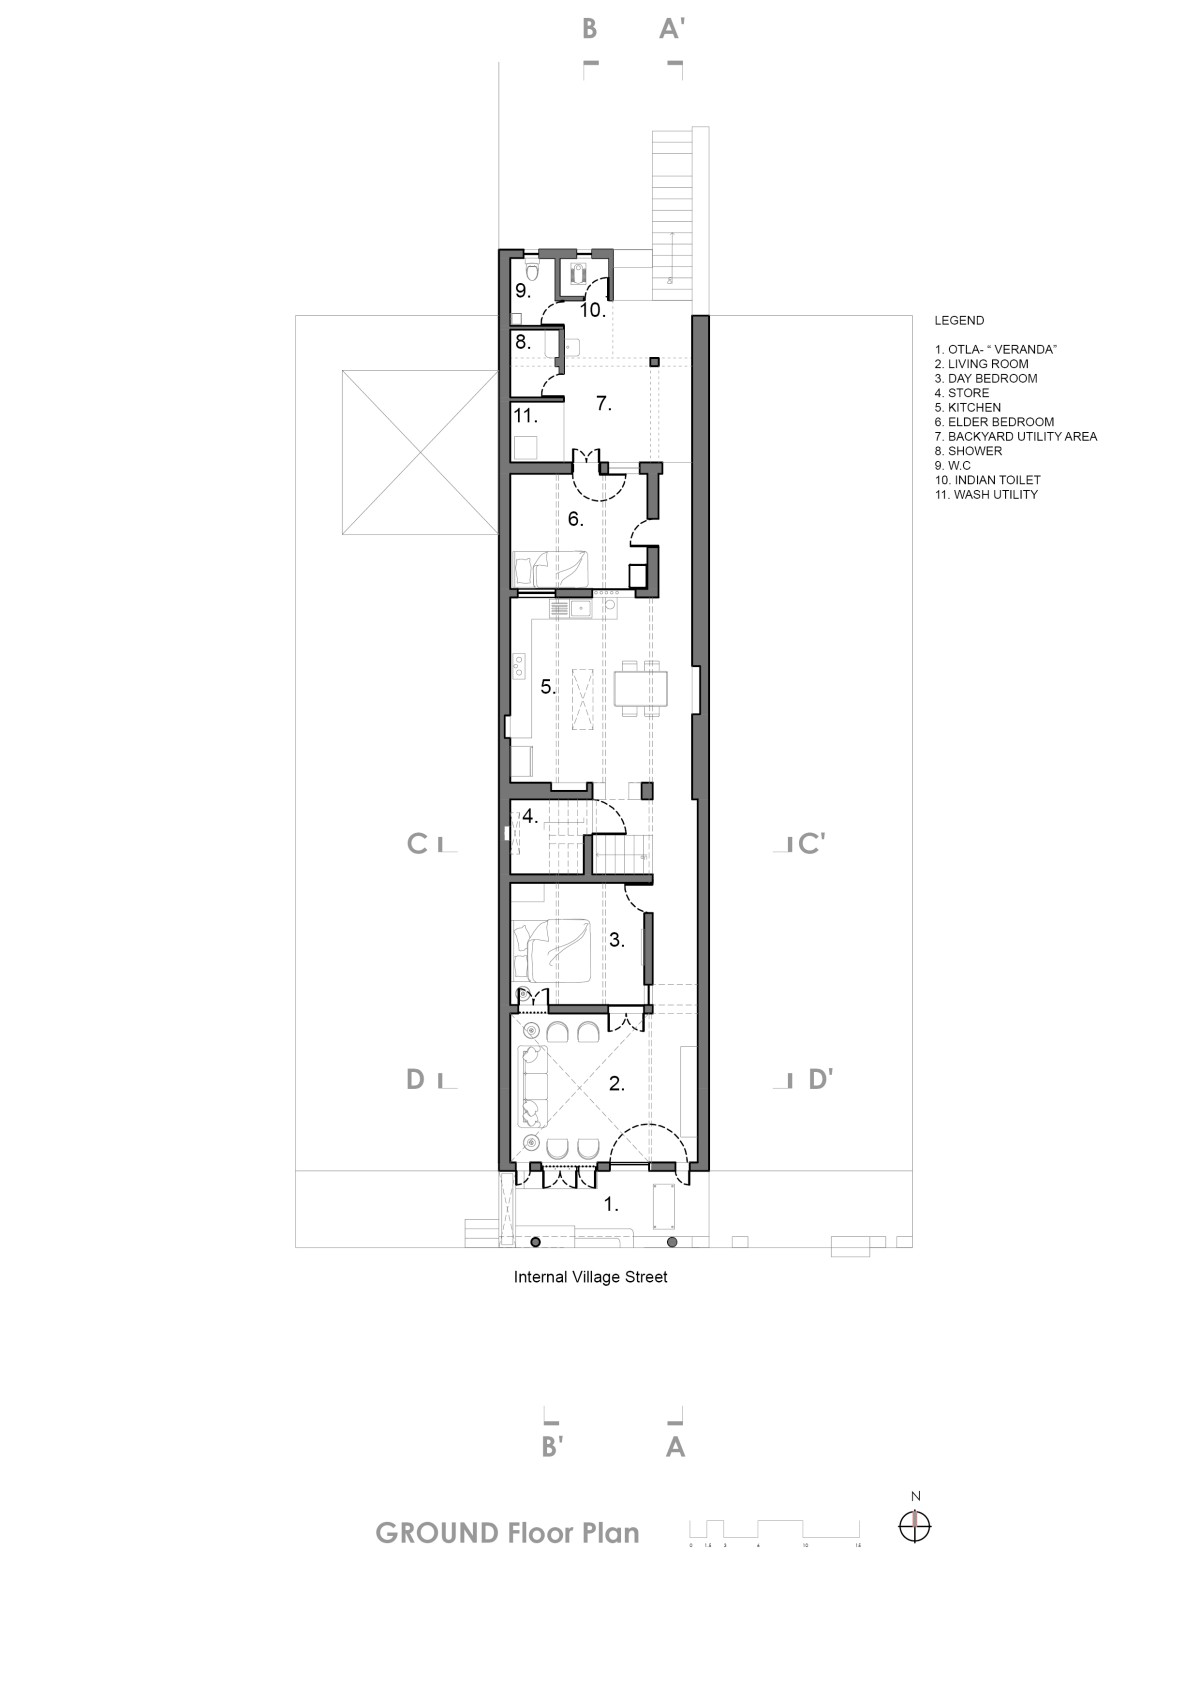 Ground floor plan of Continuum House by Project Terra